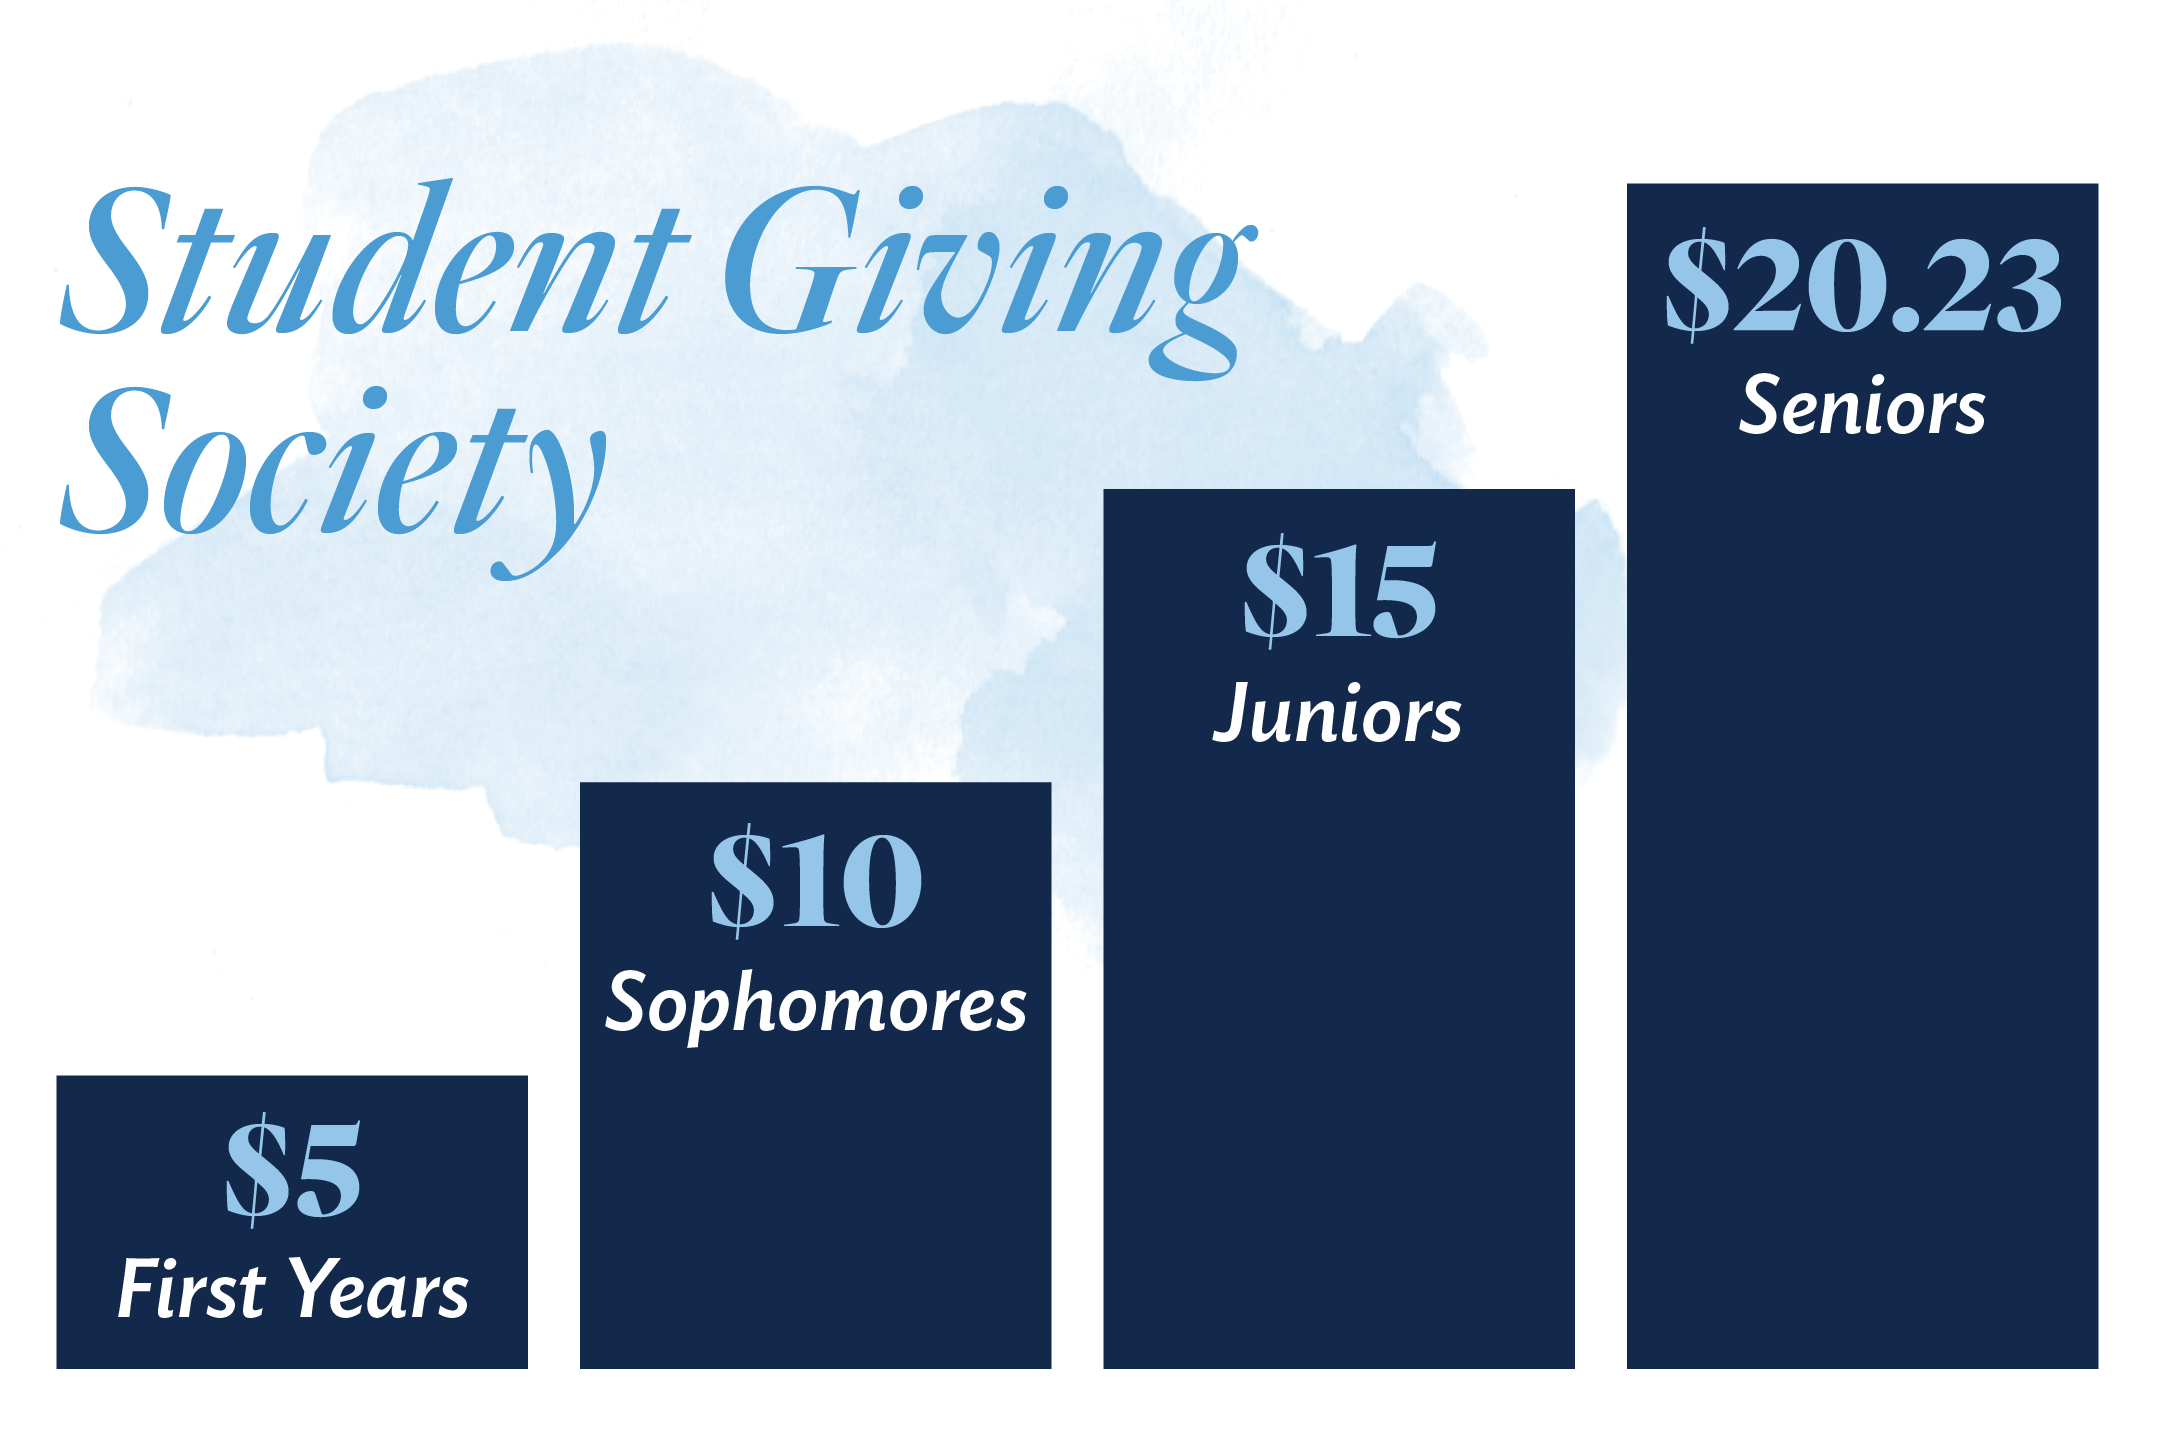 Student Giving Society chart - $5 first years, $10 sophomores, $15 juniors, $20.23 seniors